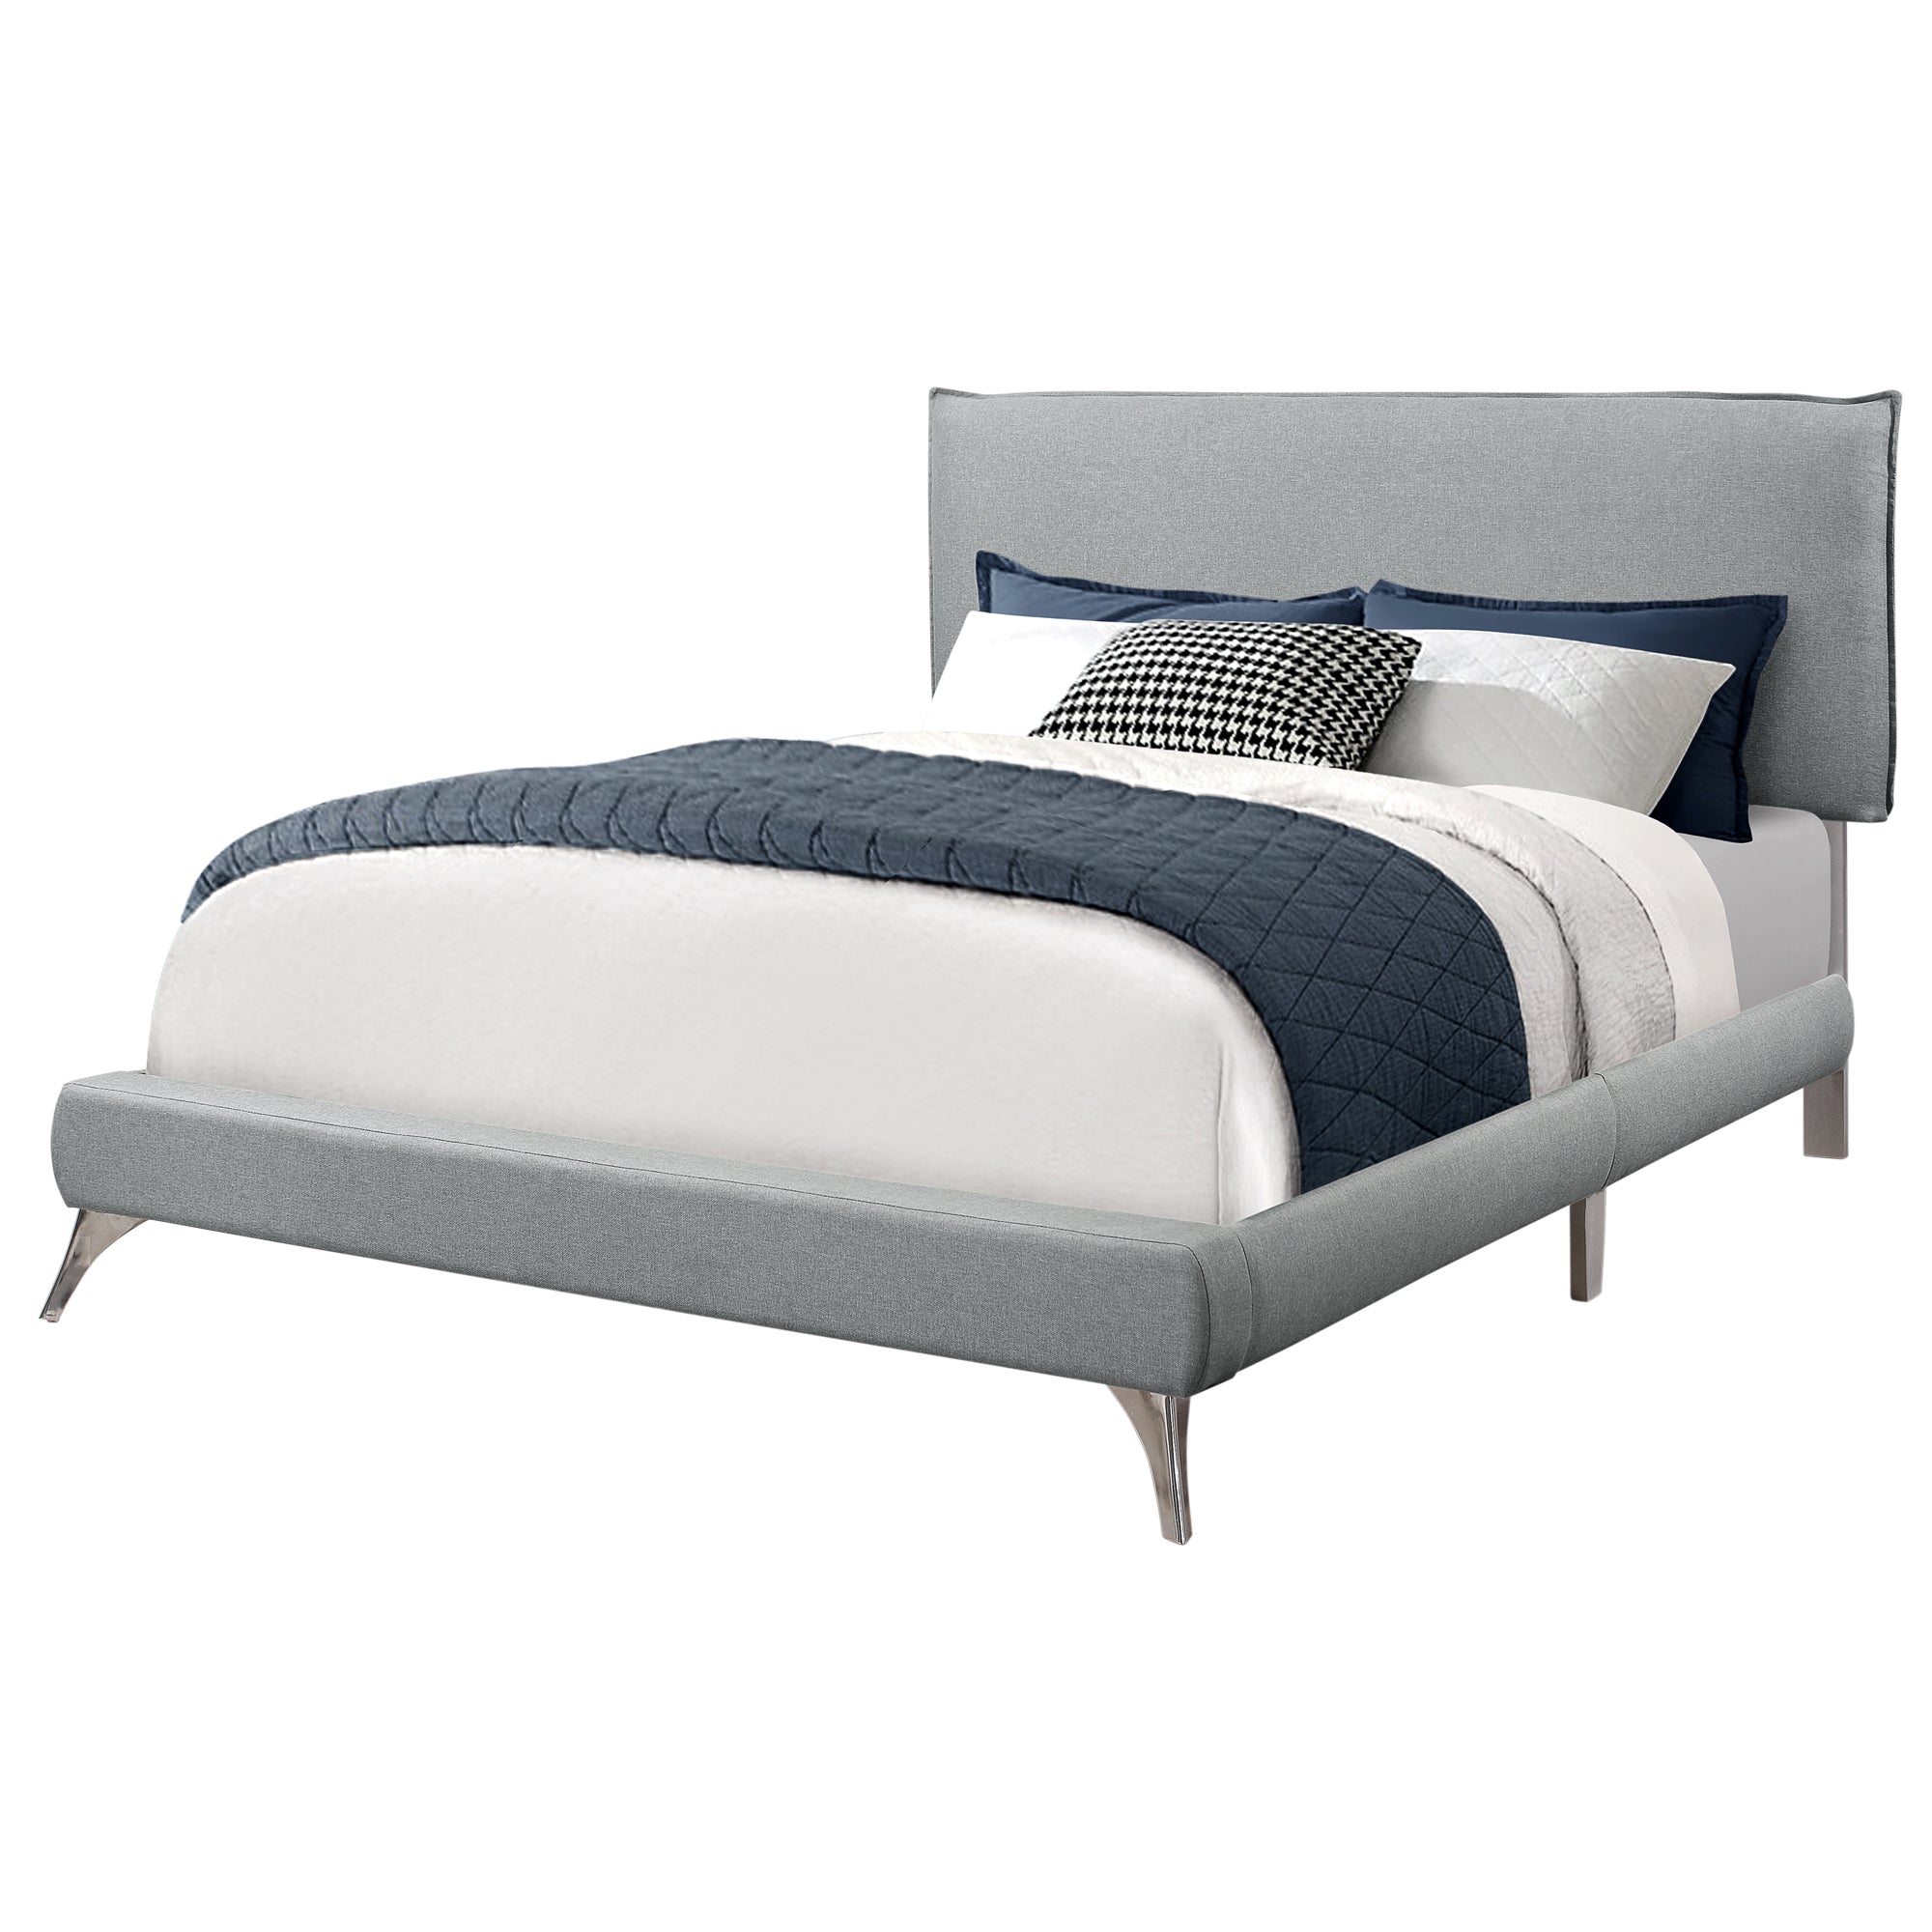 Bed - Queen Size / Grey Linen With Chrome Legs